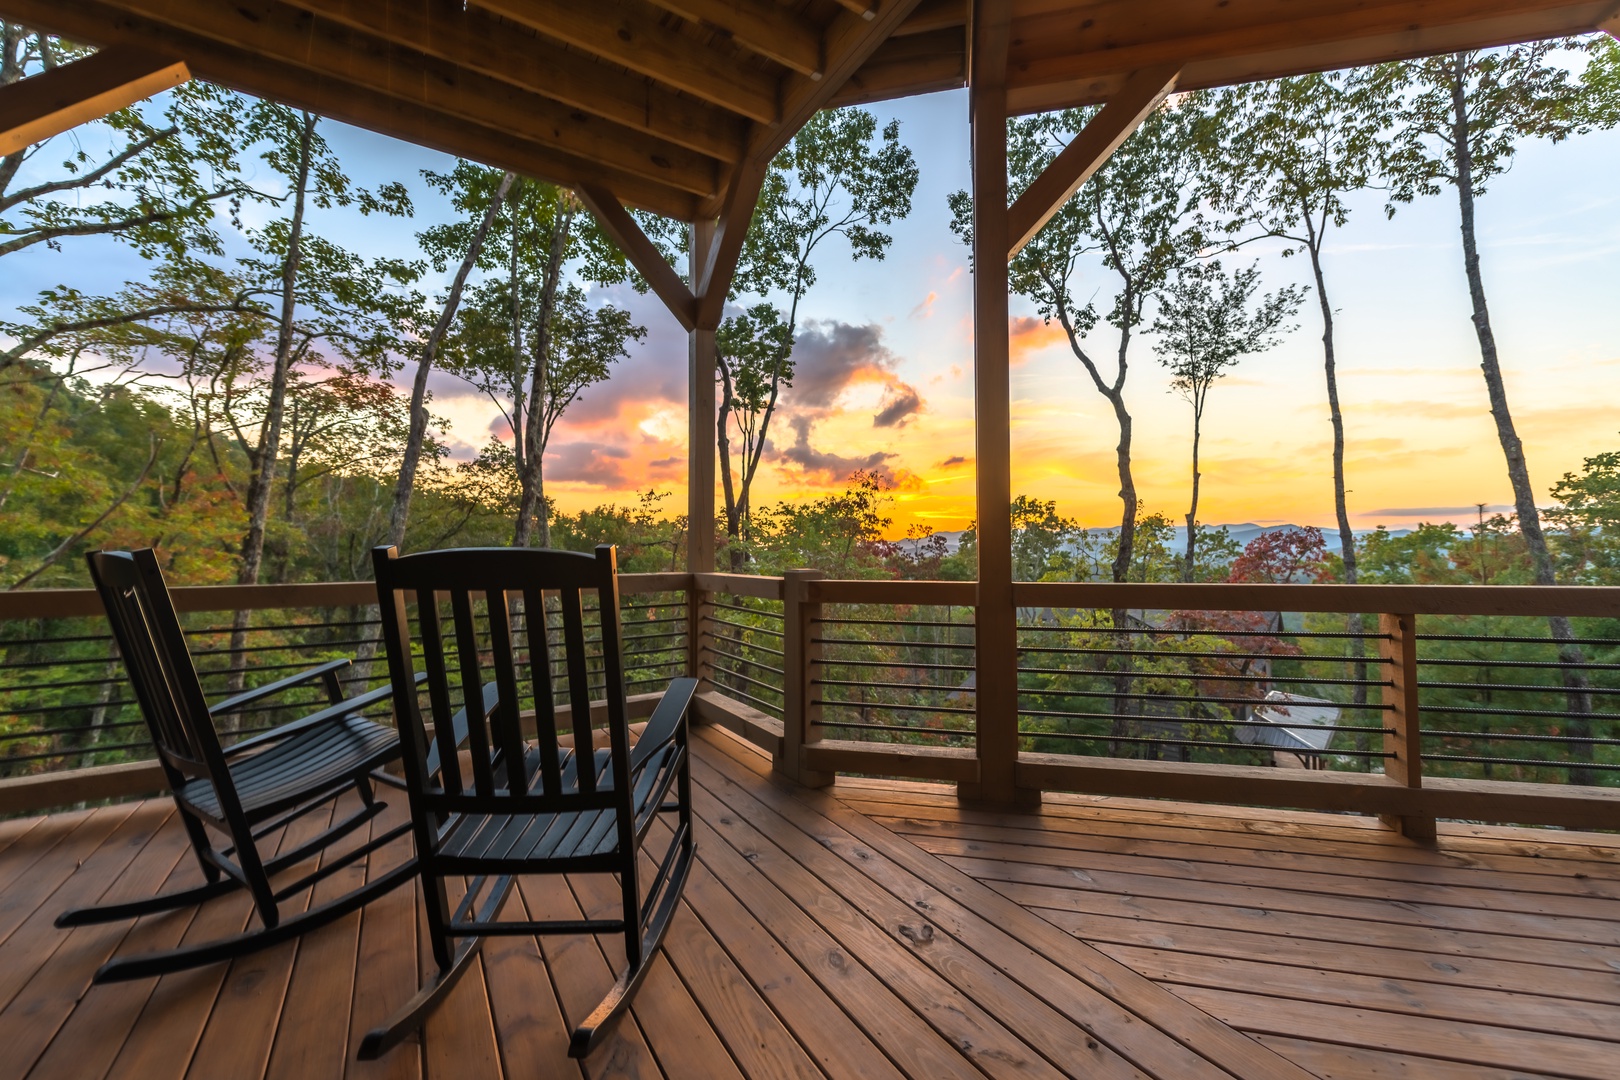 Highland Escape- Rocking chairs on the deck with mountain views